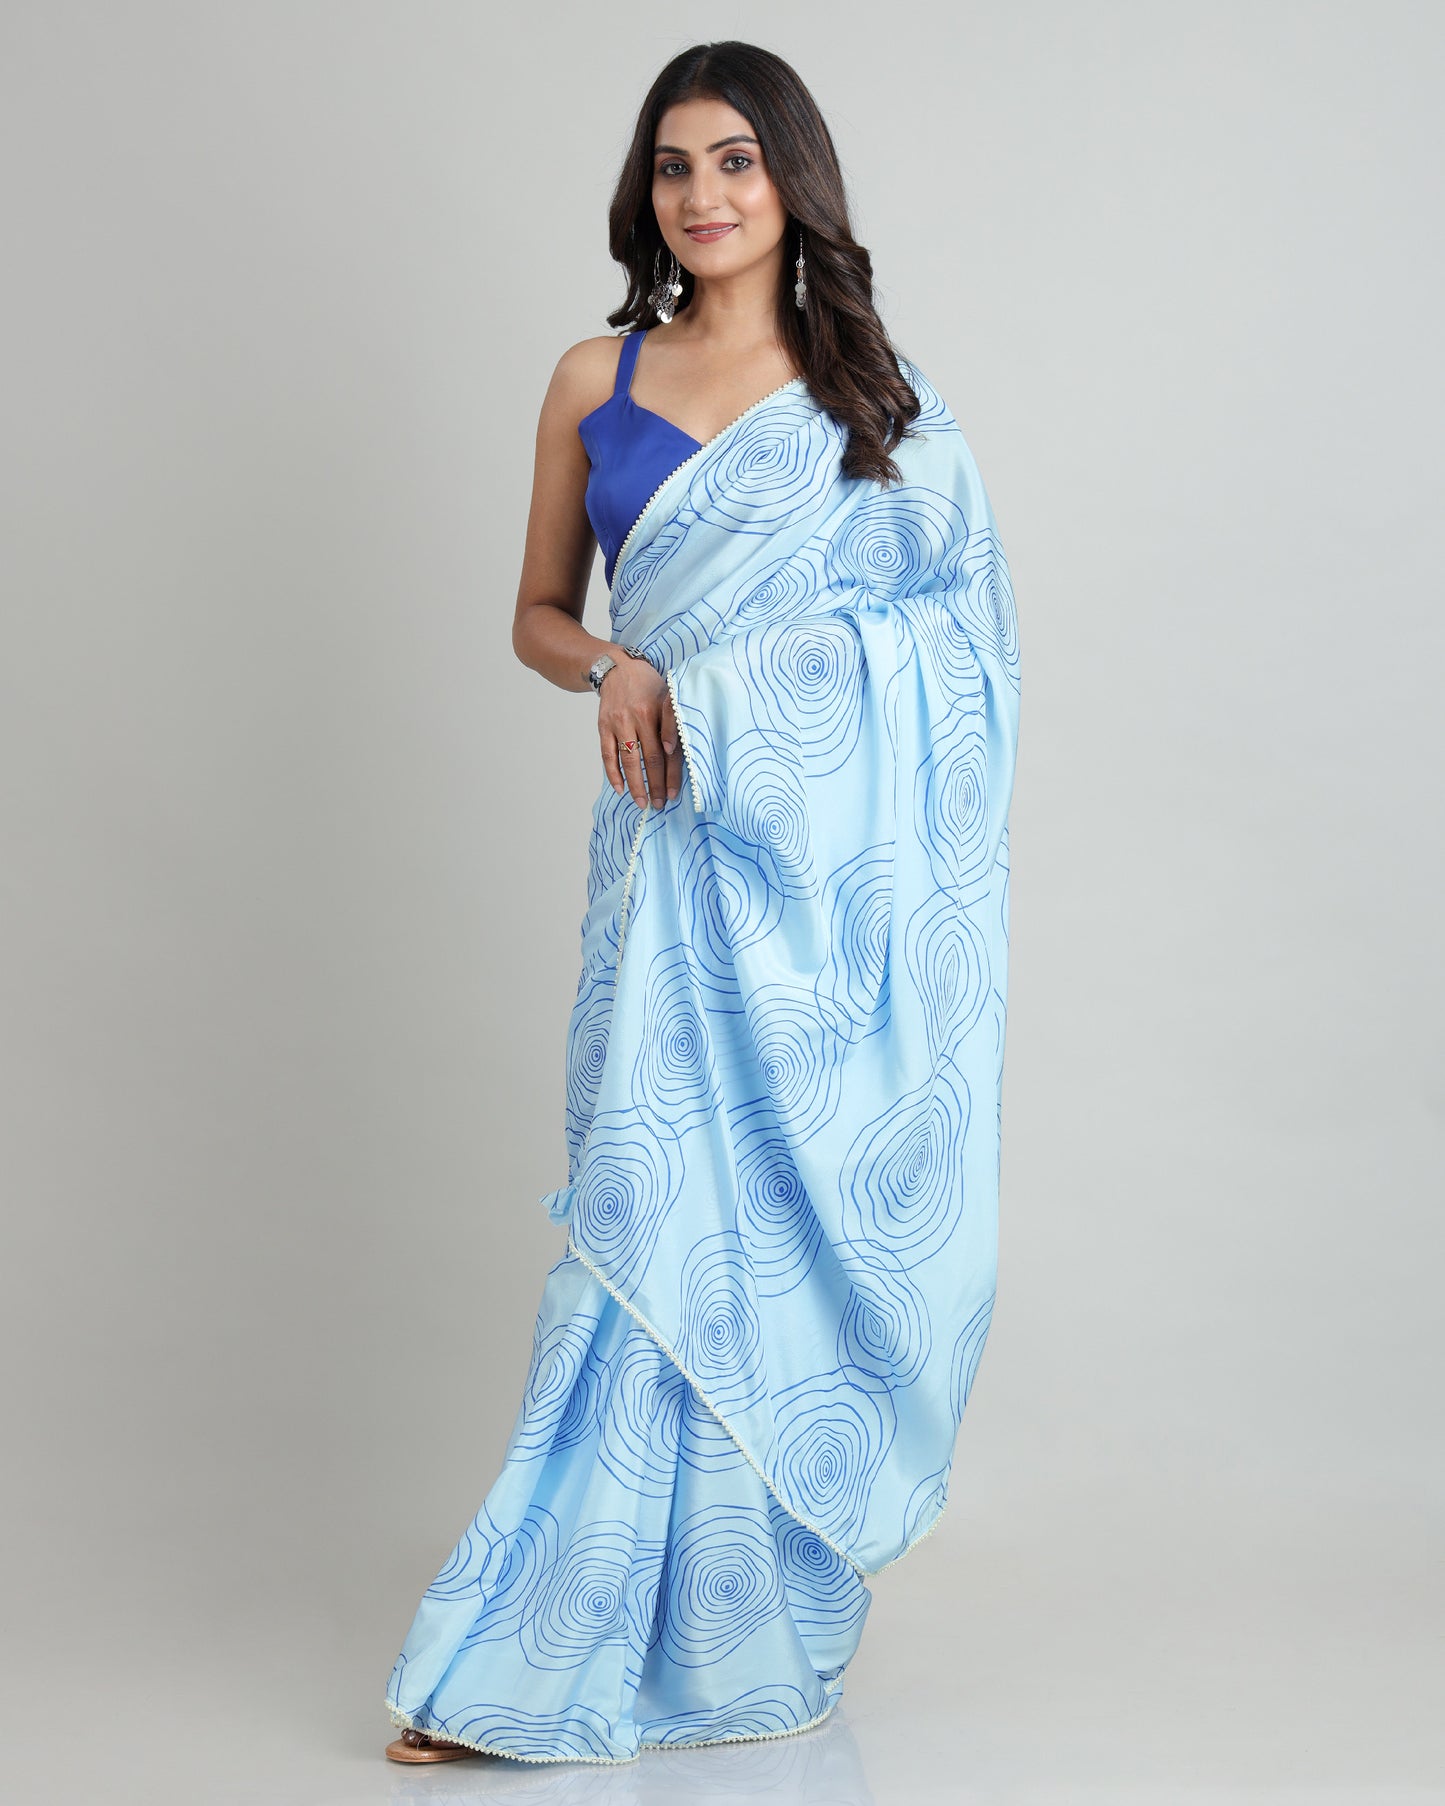 A Touch of Grace: Silk Saree With Delicate Pearl Lace